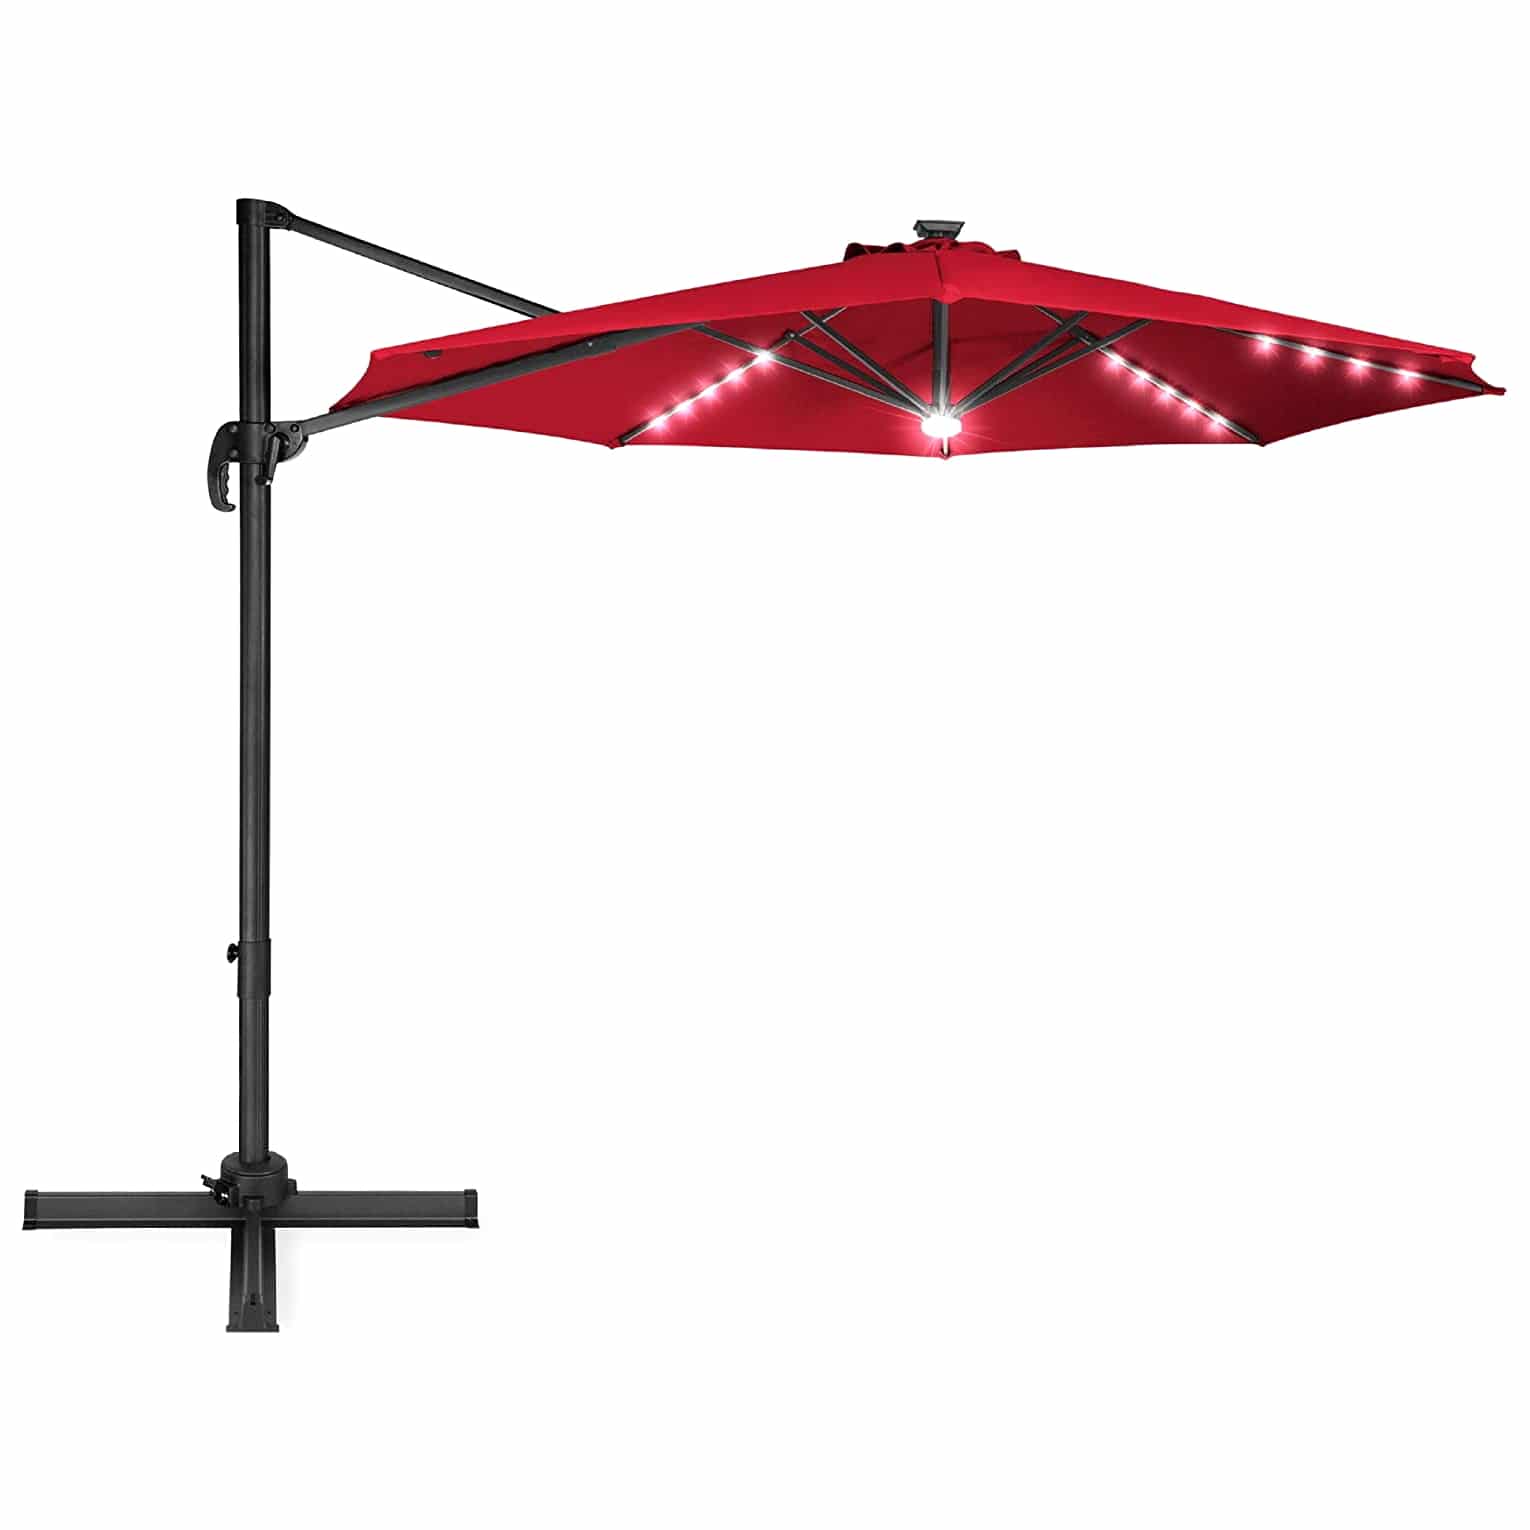 Best Choice Products LED Cantilever Umbrella